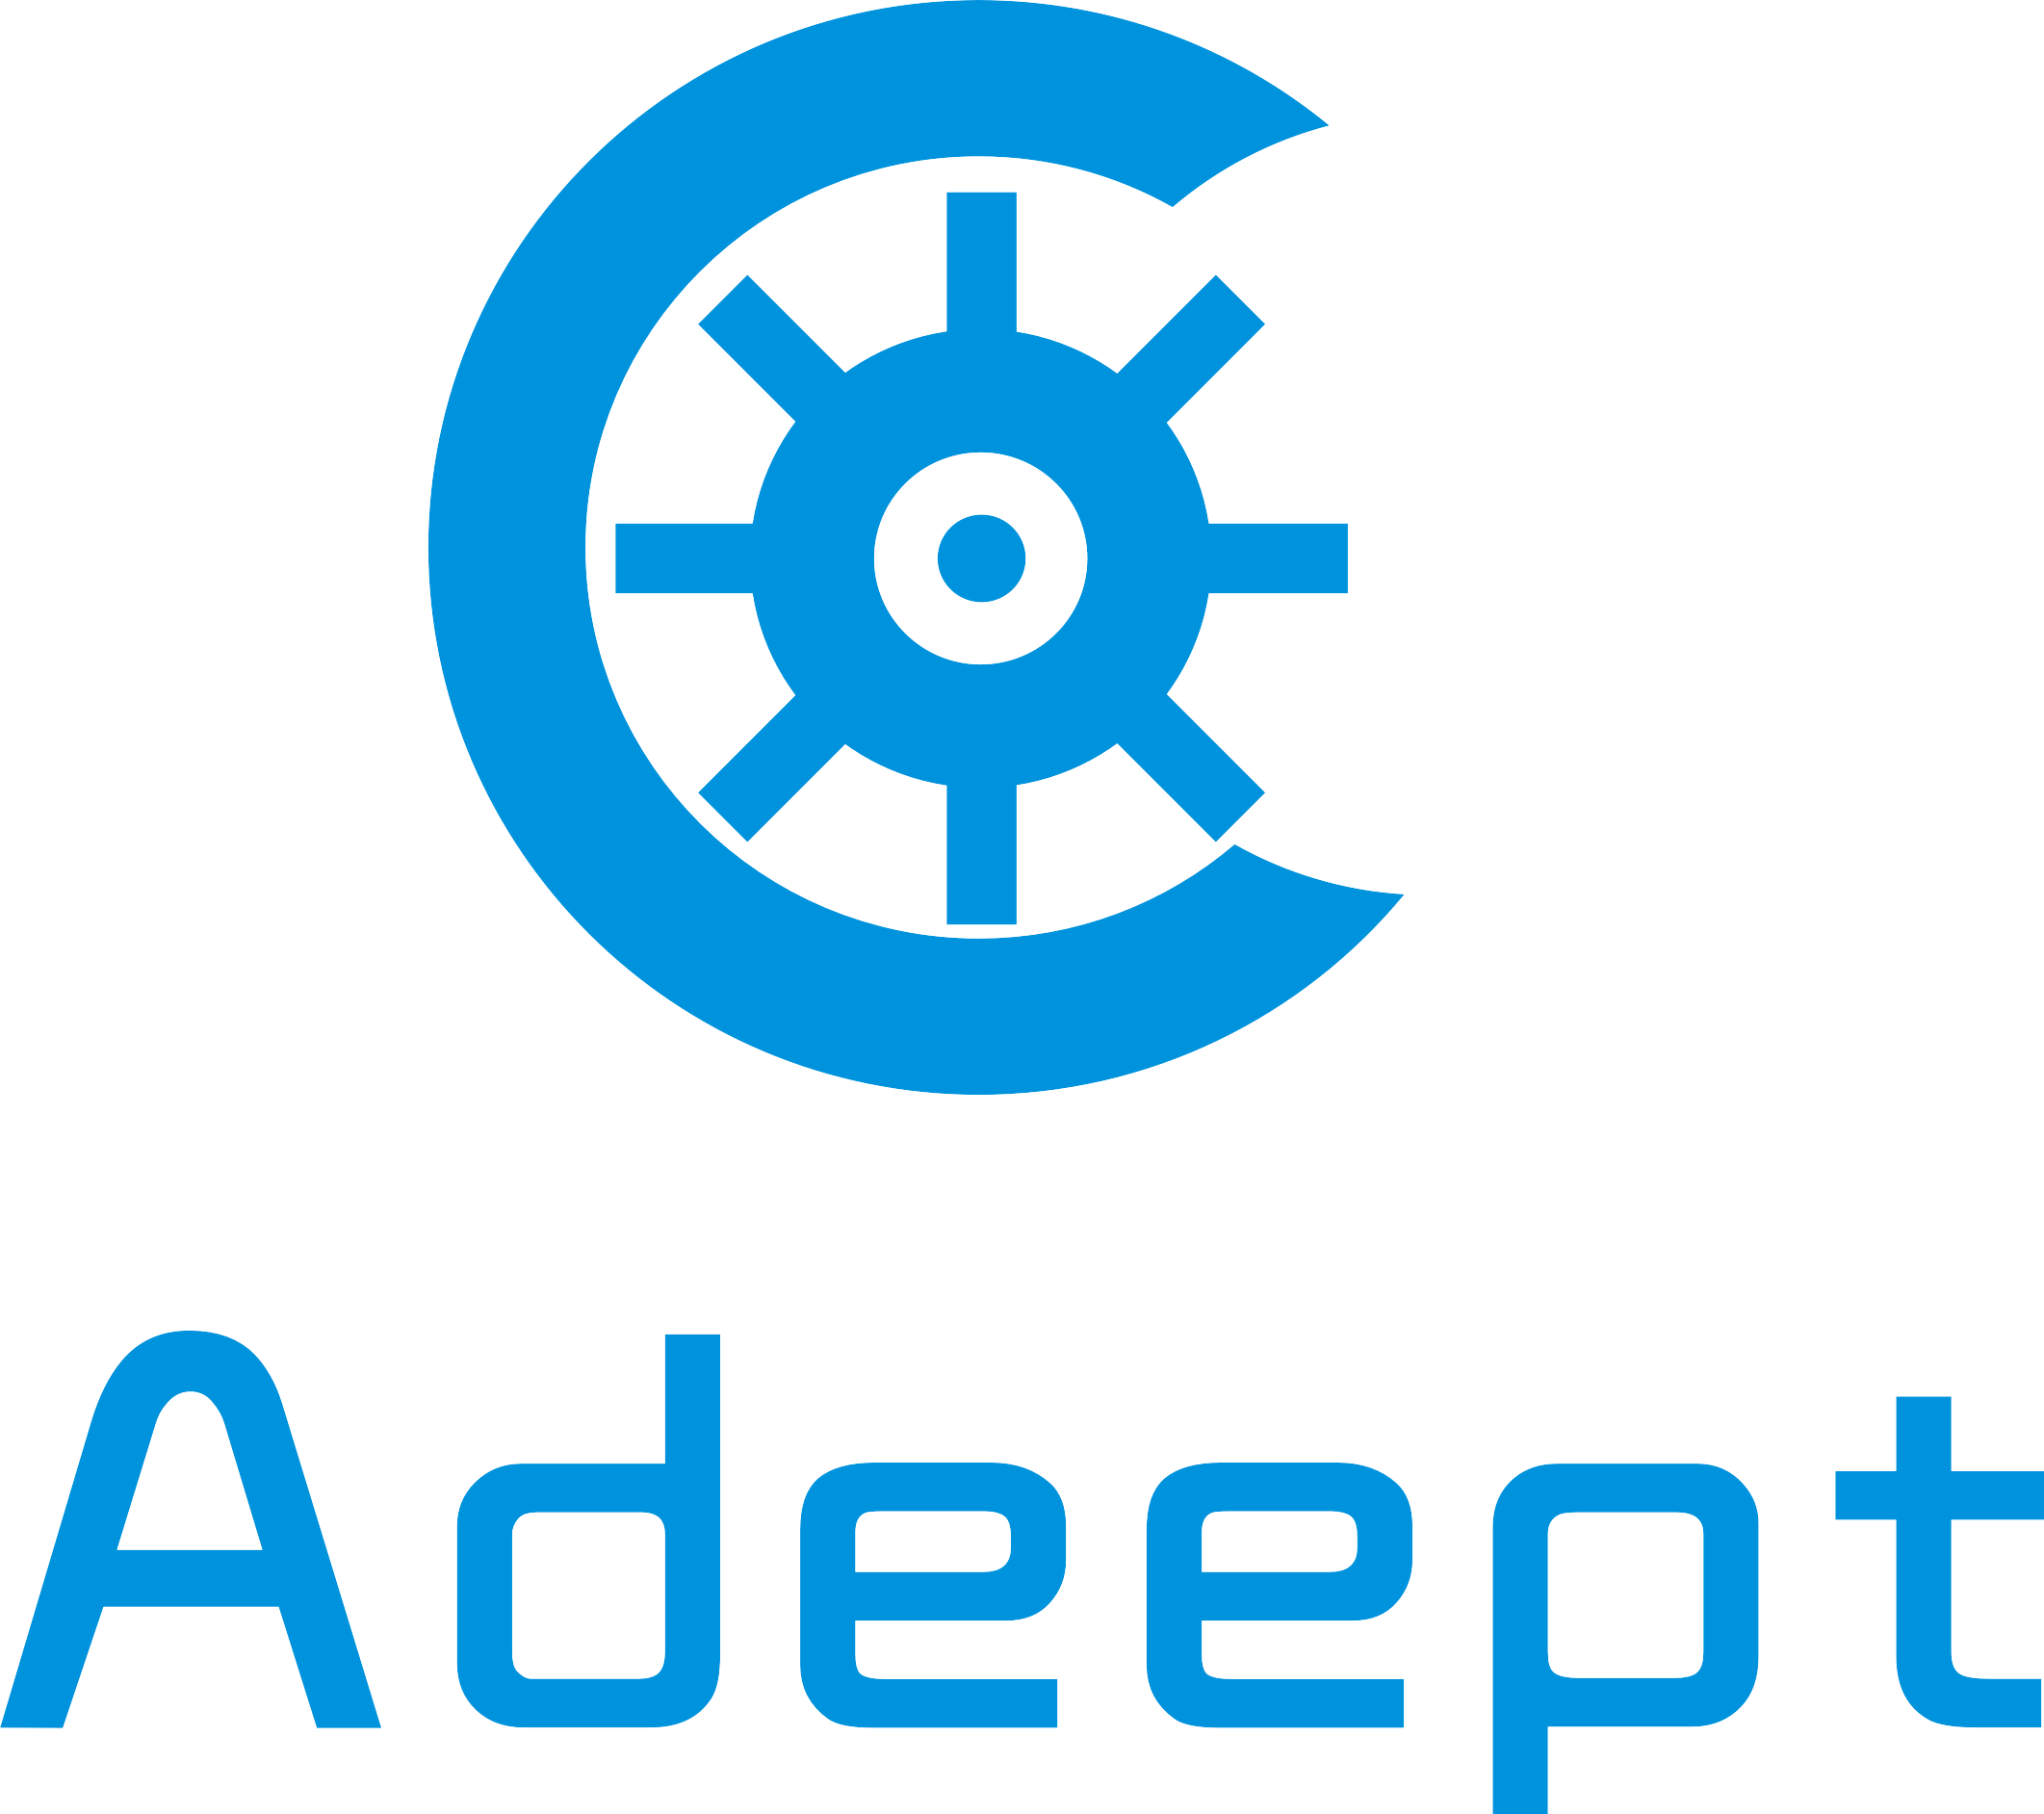 Adeept Smart Car Kit for ESP32-WROVER from Adeept on Tindie